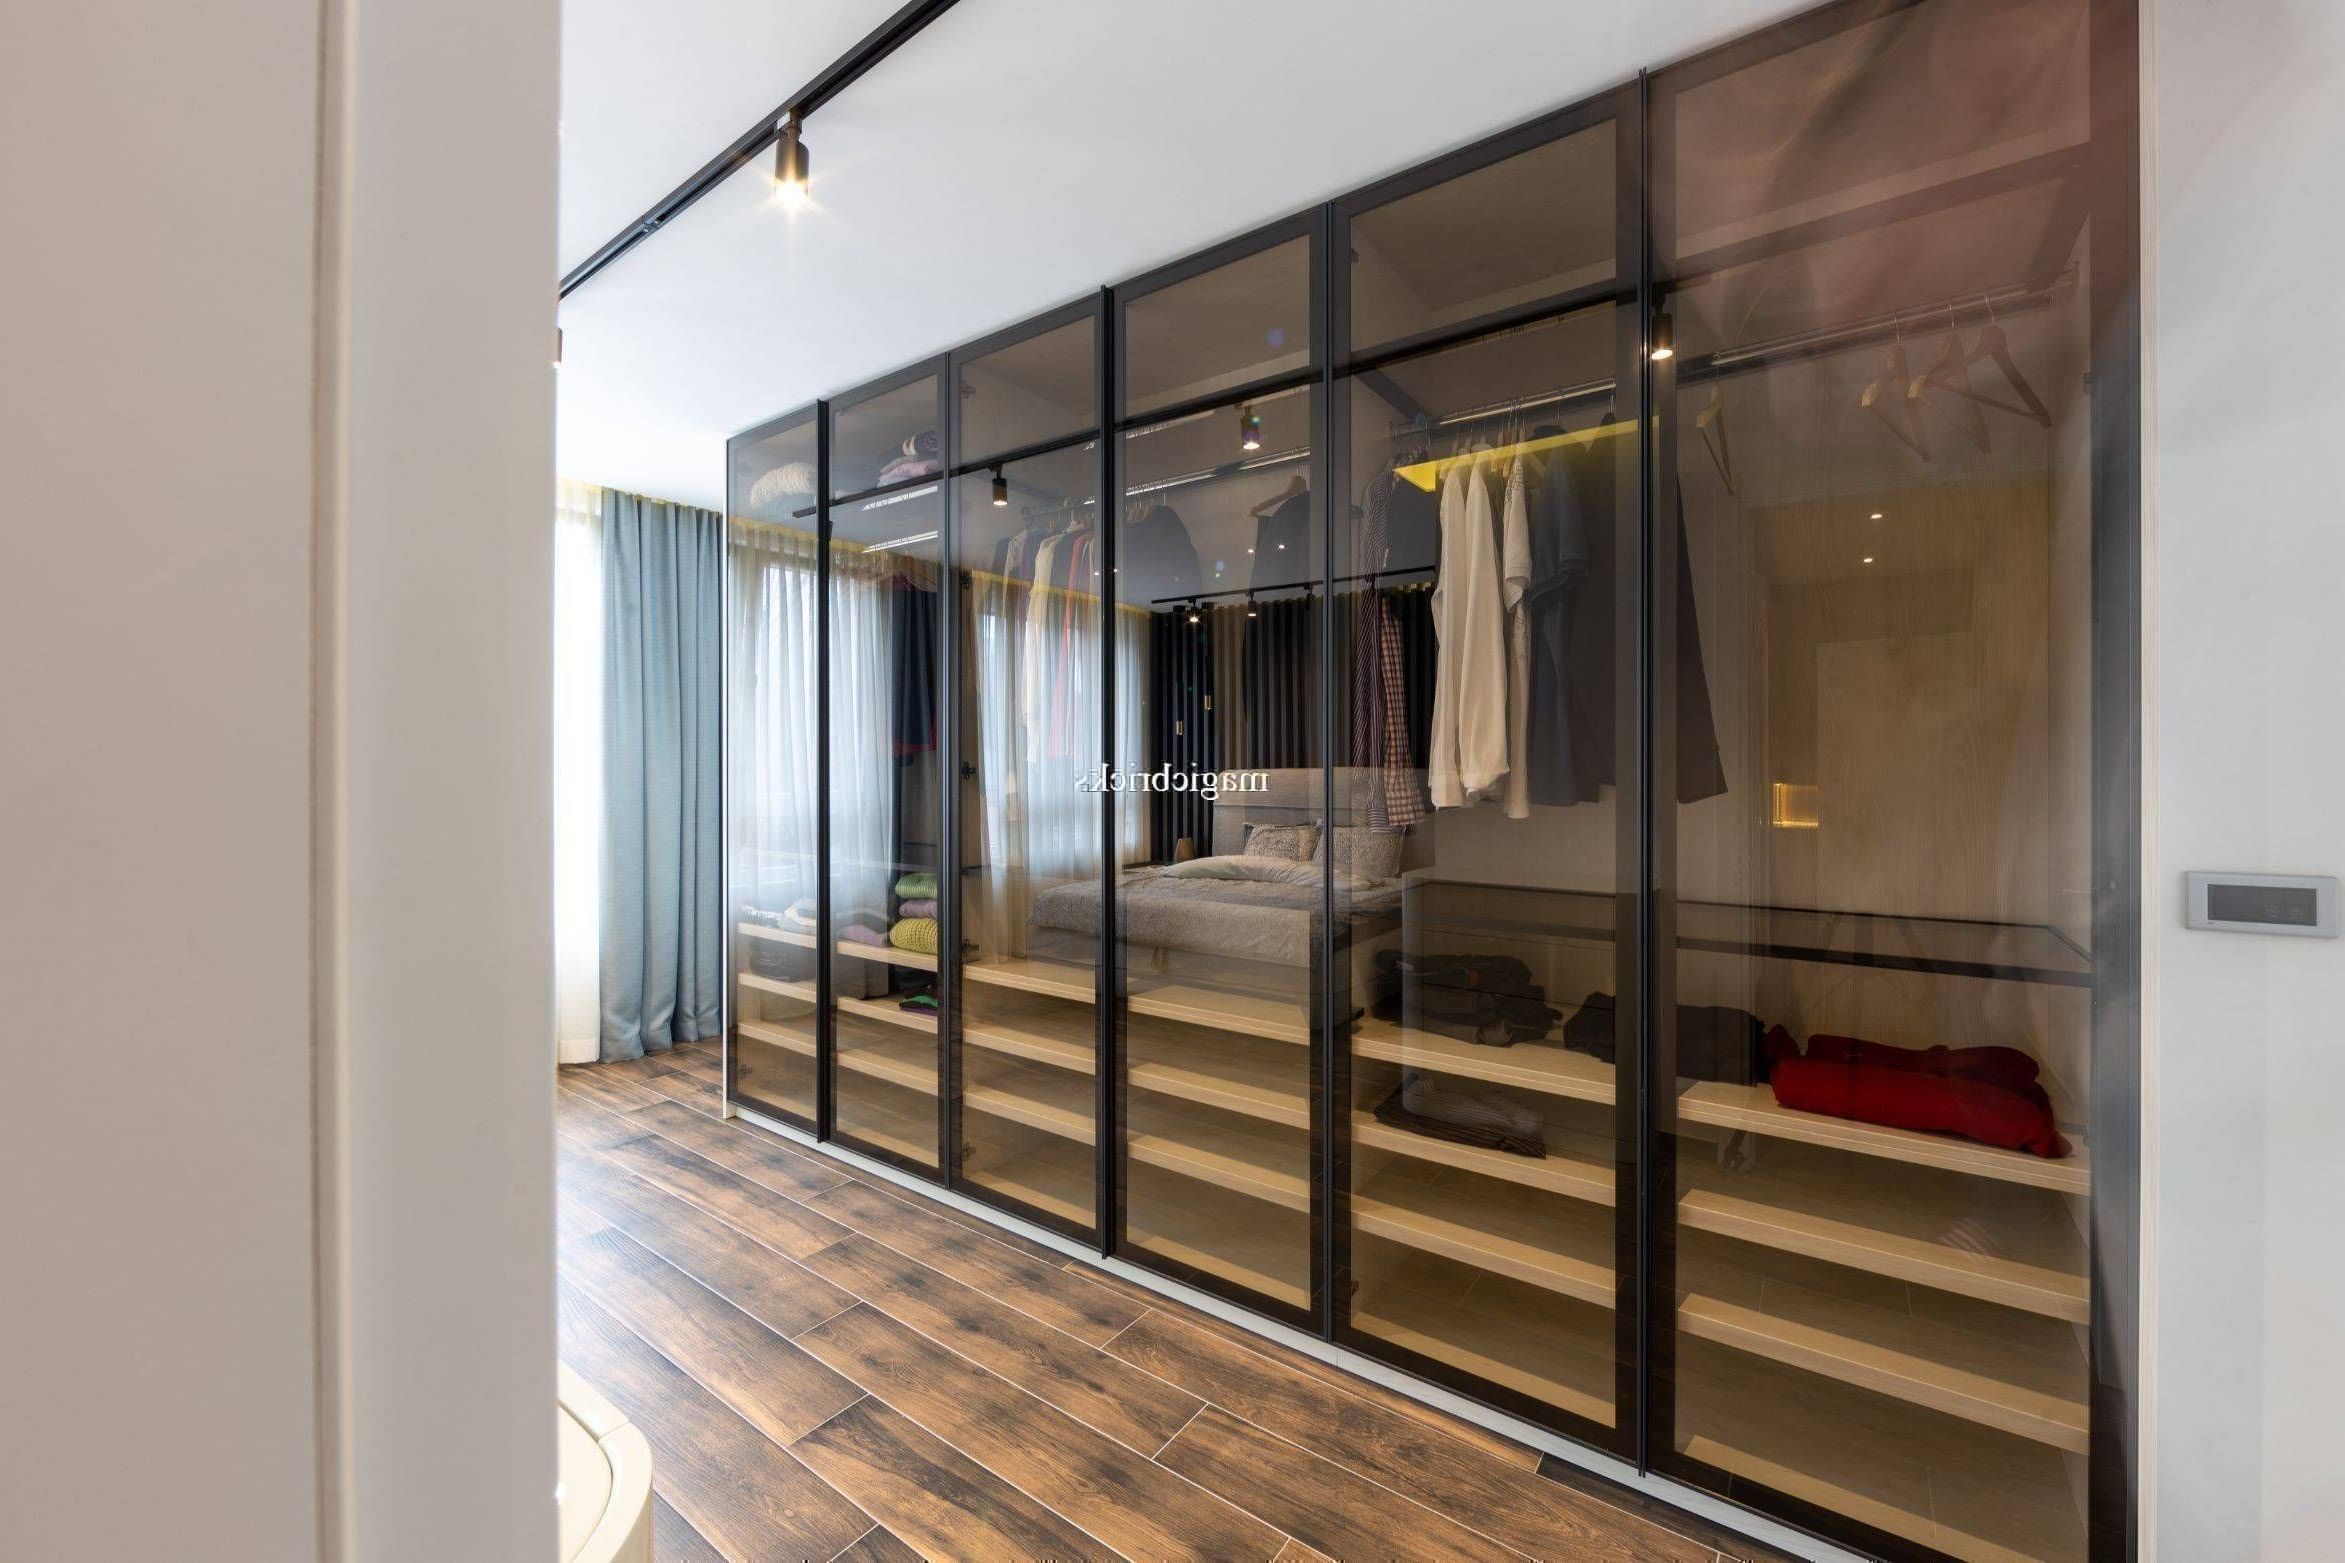 15 Glass Wardrobe Design Ideas For Your Home Pertaining To Black Glass Wardrobes (Gallery 16 of 20)